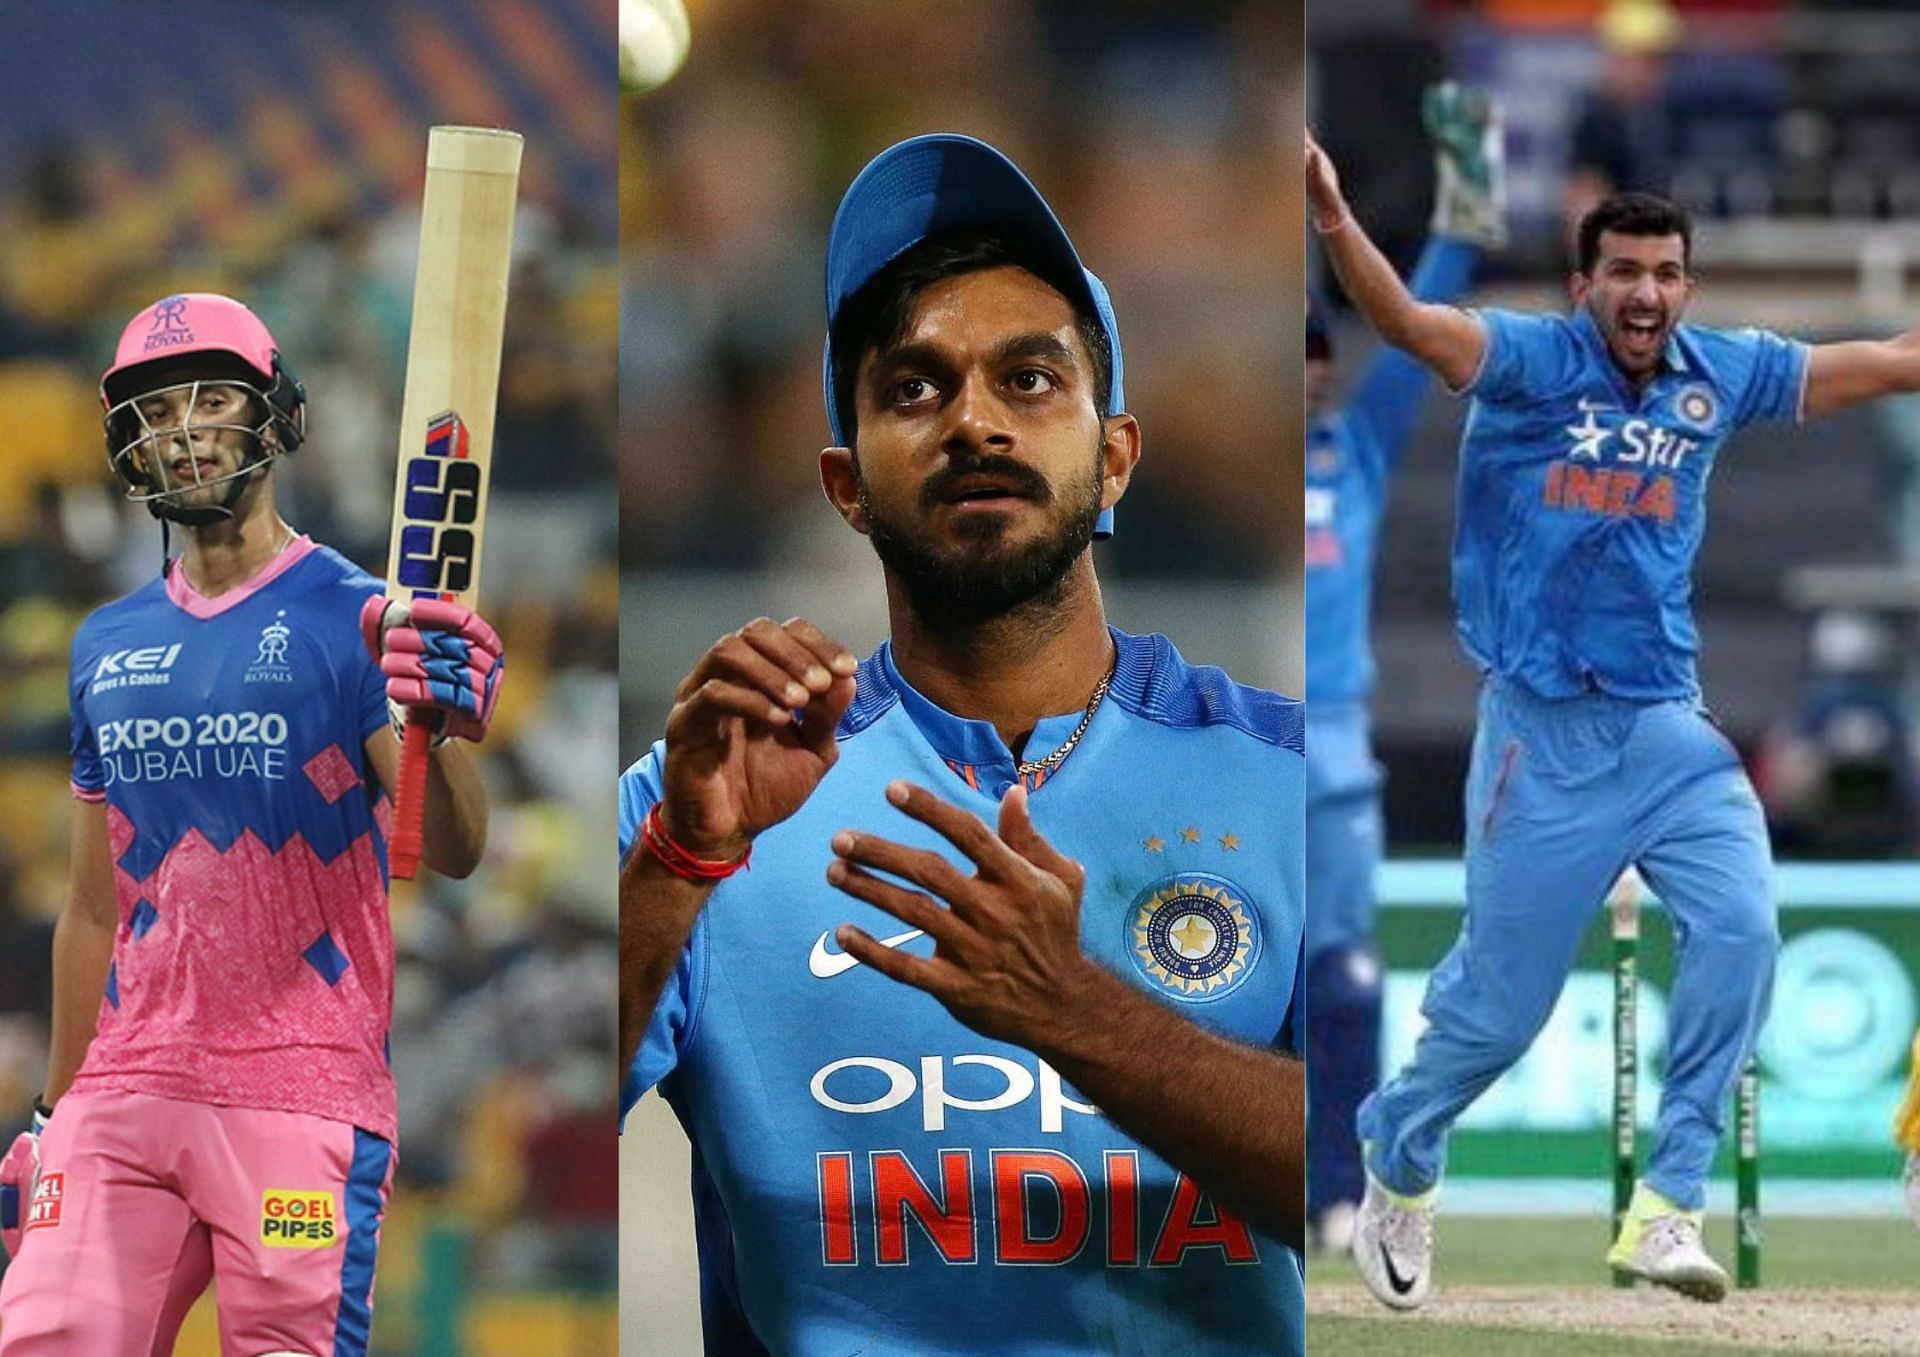 Three capped Indian seam-bowling all-rounders who will be in demand. (Picture Credits: IPL; Getty Images; Twitter/Rishi Dhawan).